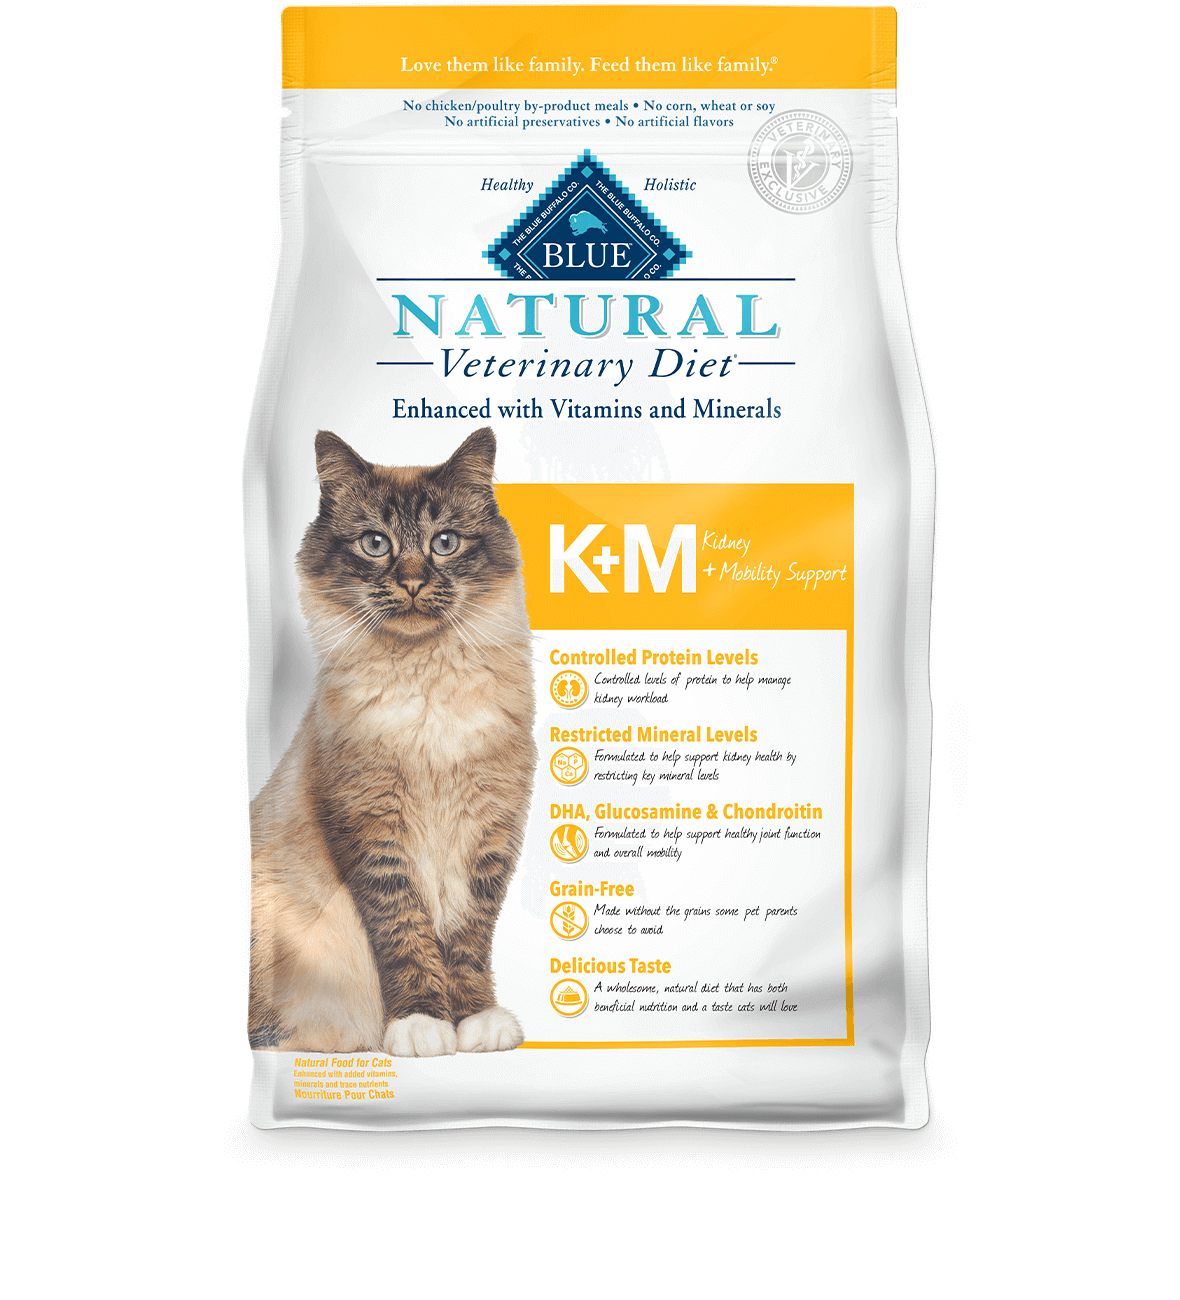 blue natural veterinary diet k+m kidney + mobility support cat dry food